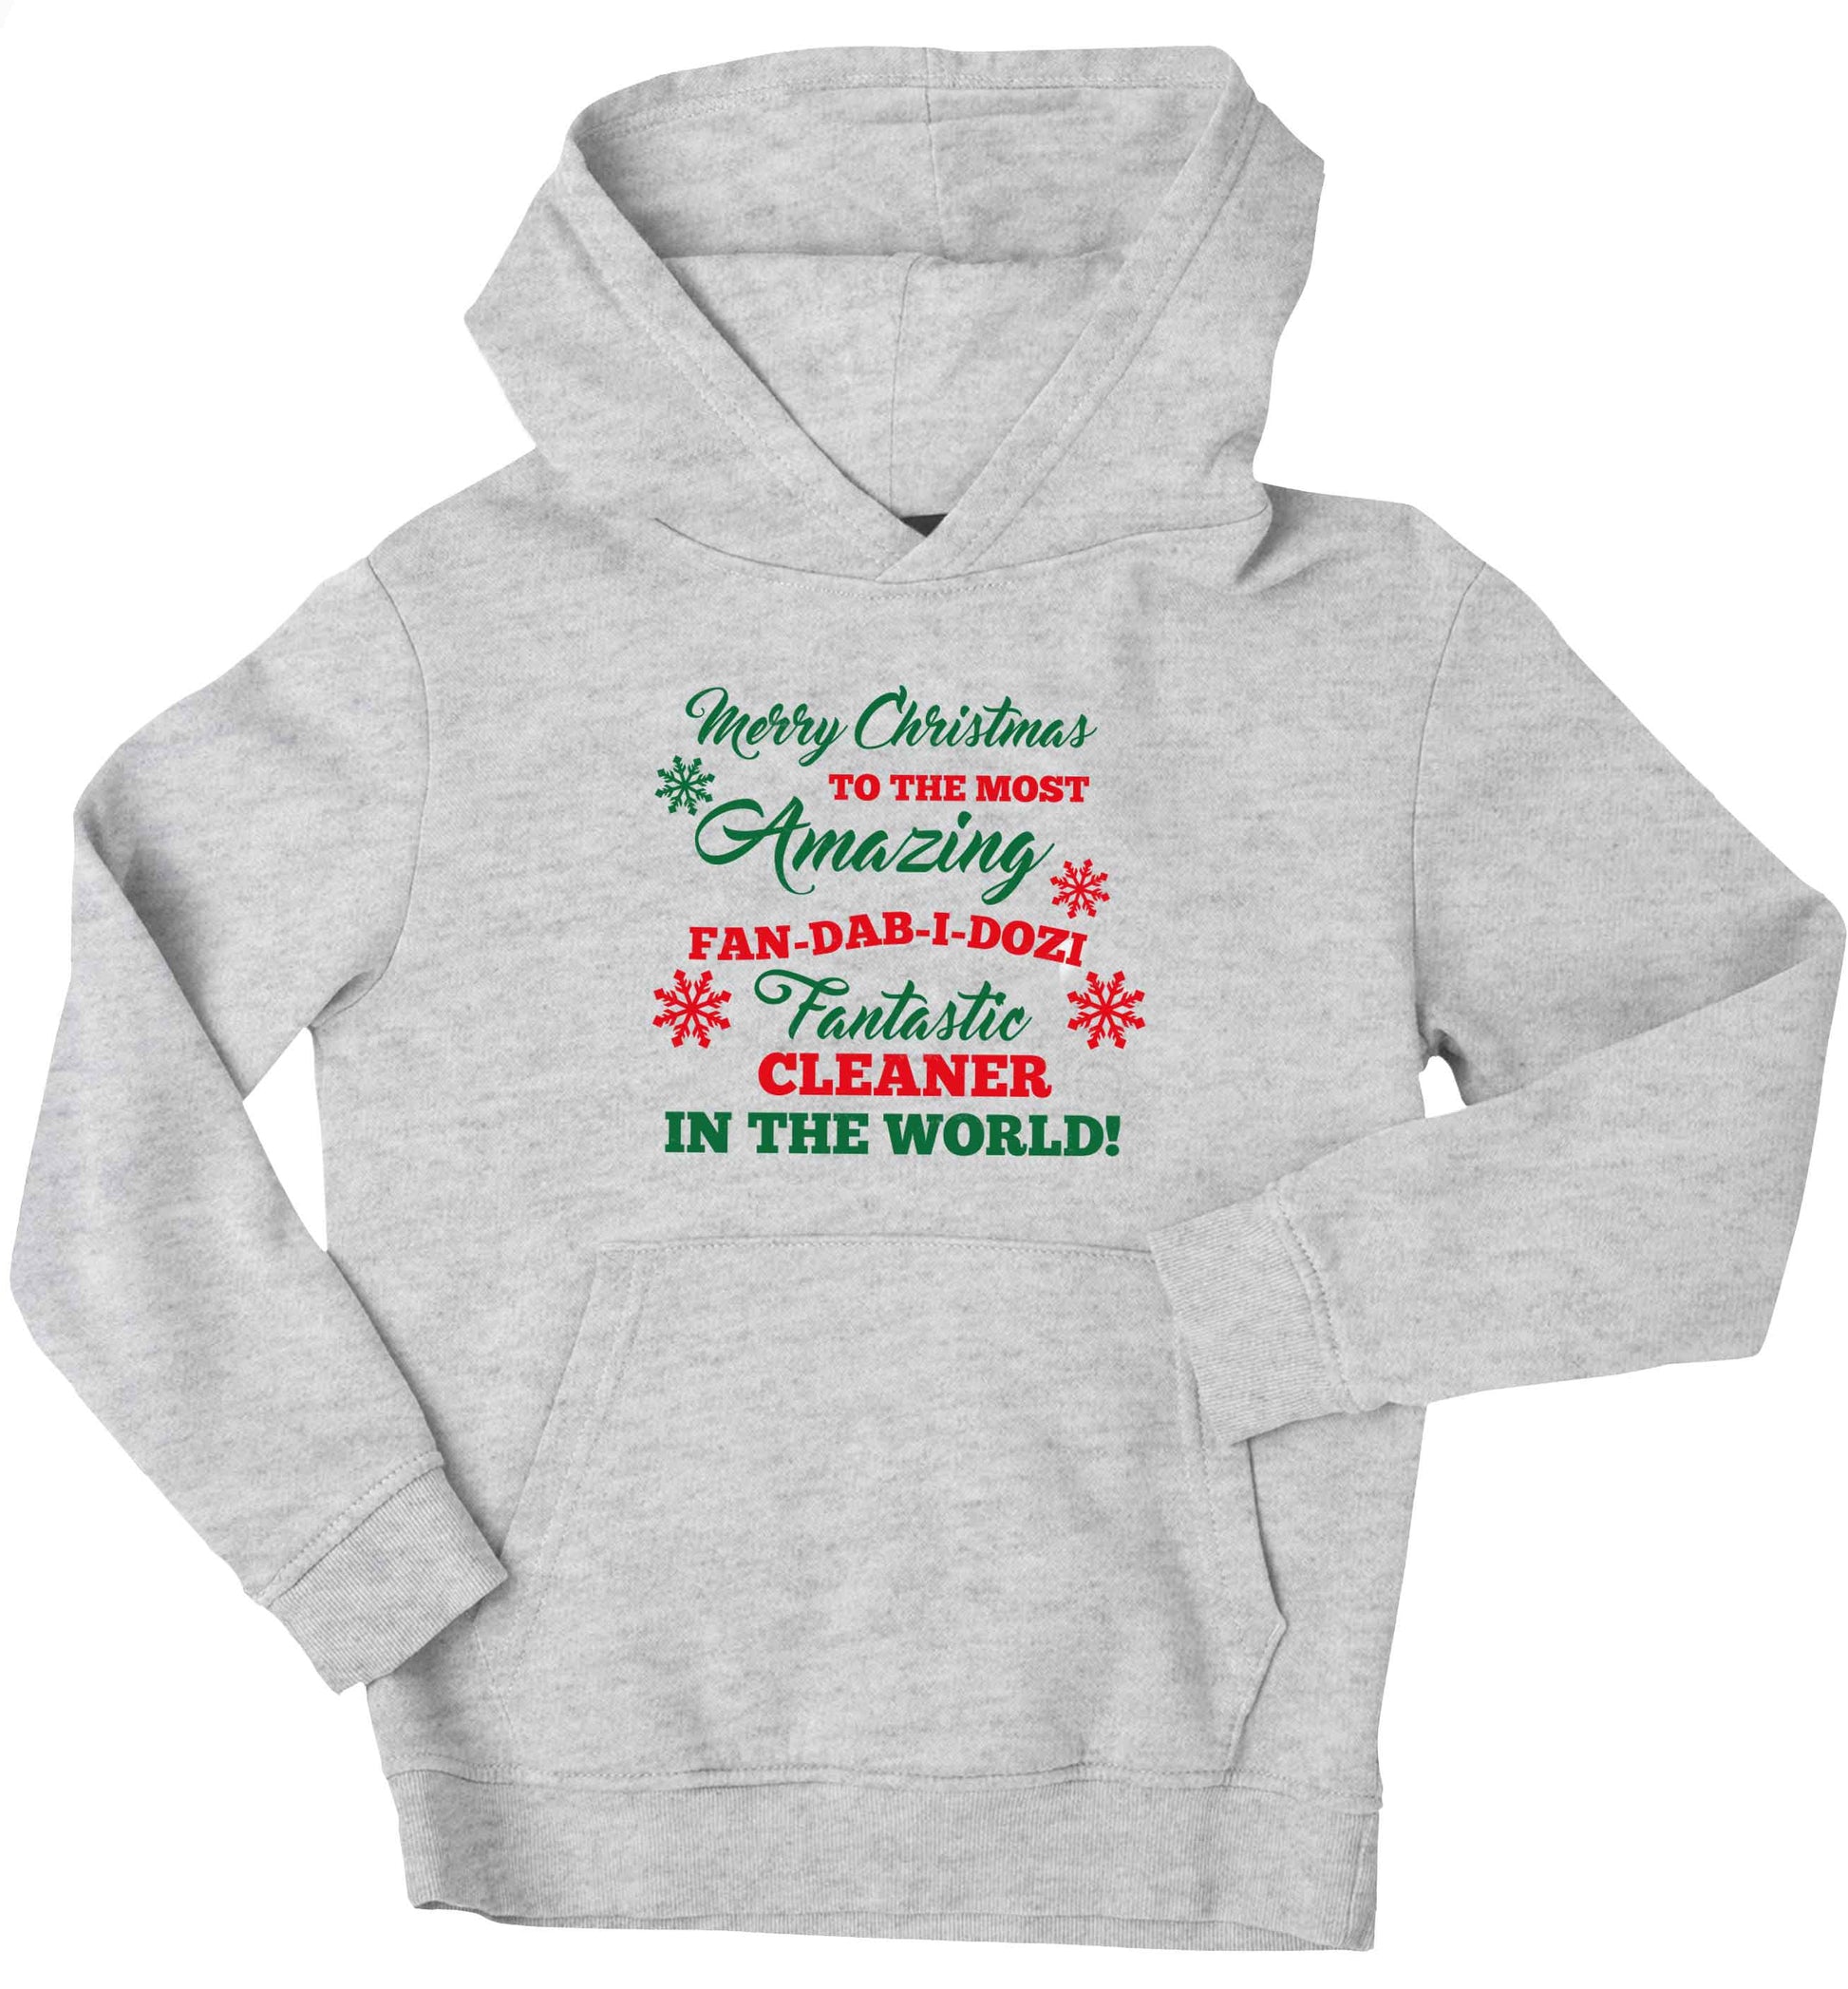 Merry Christmas to the most amazing fan-dab-i-dozi fantasic cleaner in the world children's grey hoodie 12-13 Years